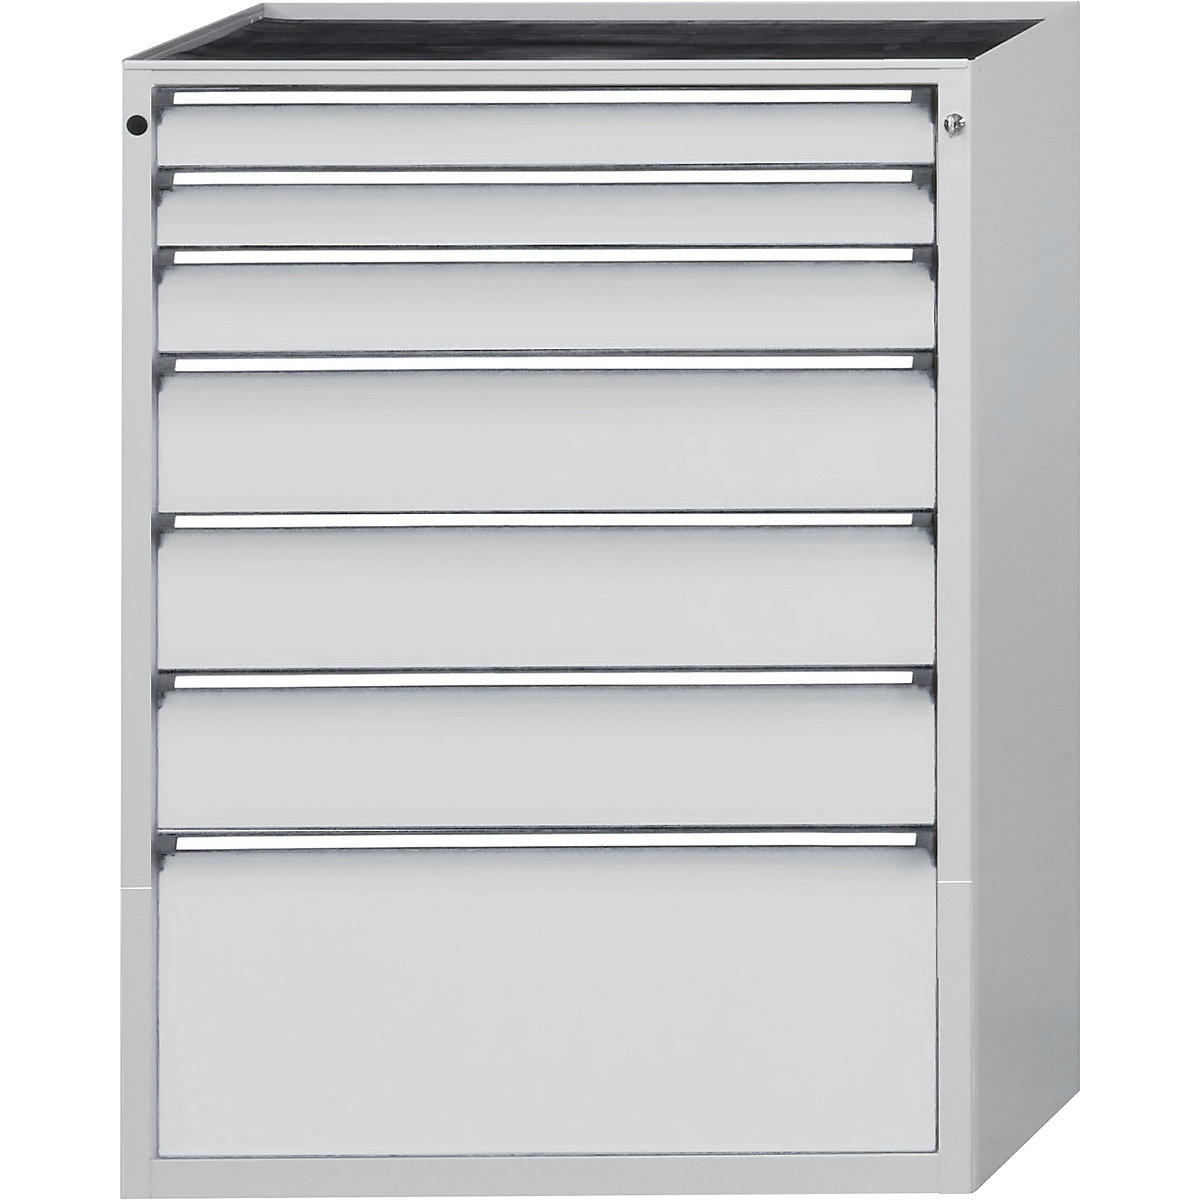 Drawer cupboard – ANKE, WxD 910 x 675 mm, 7 drawers, height 1280 mm, front in light grey-11